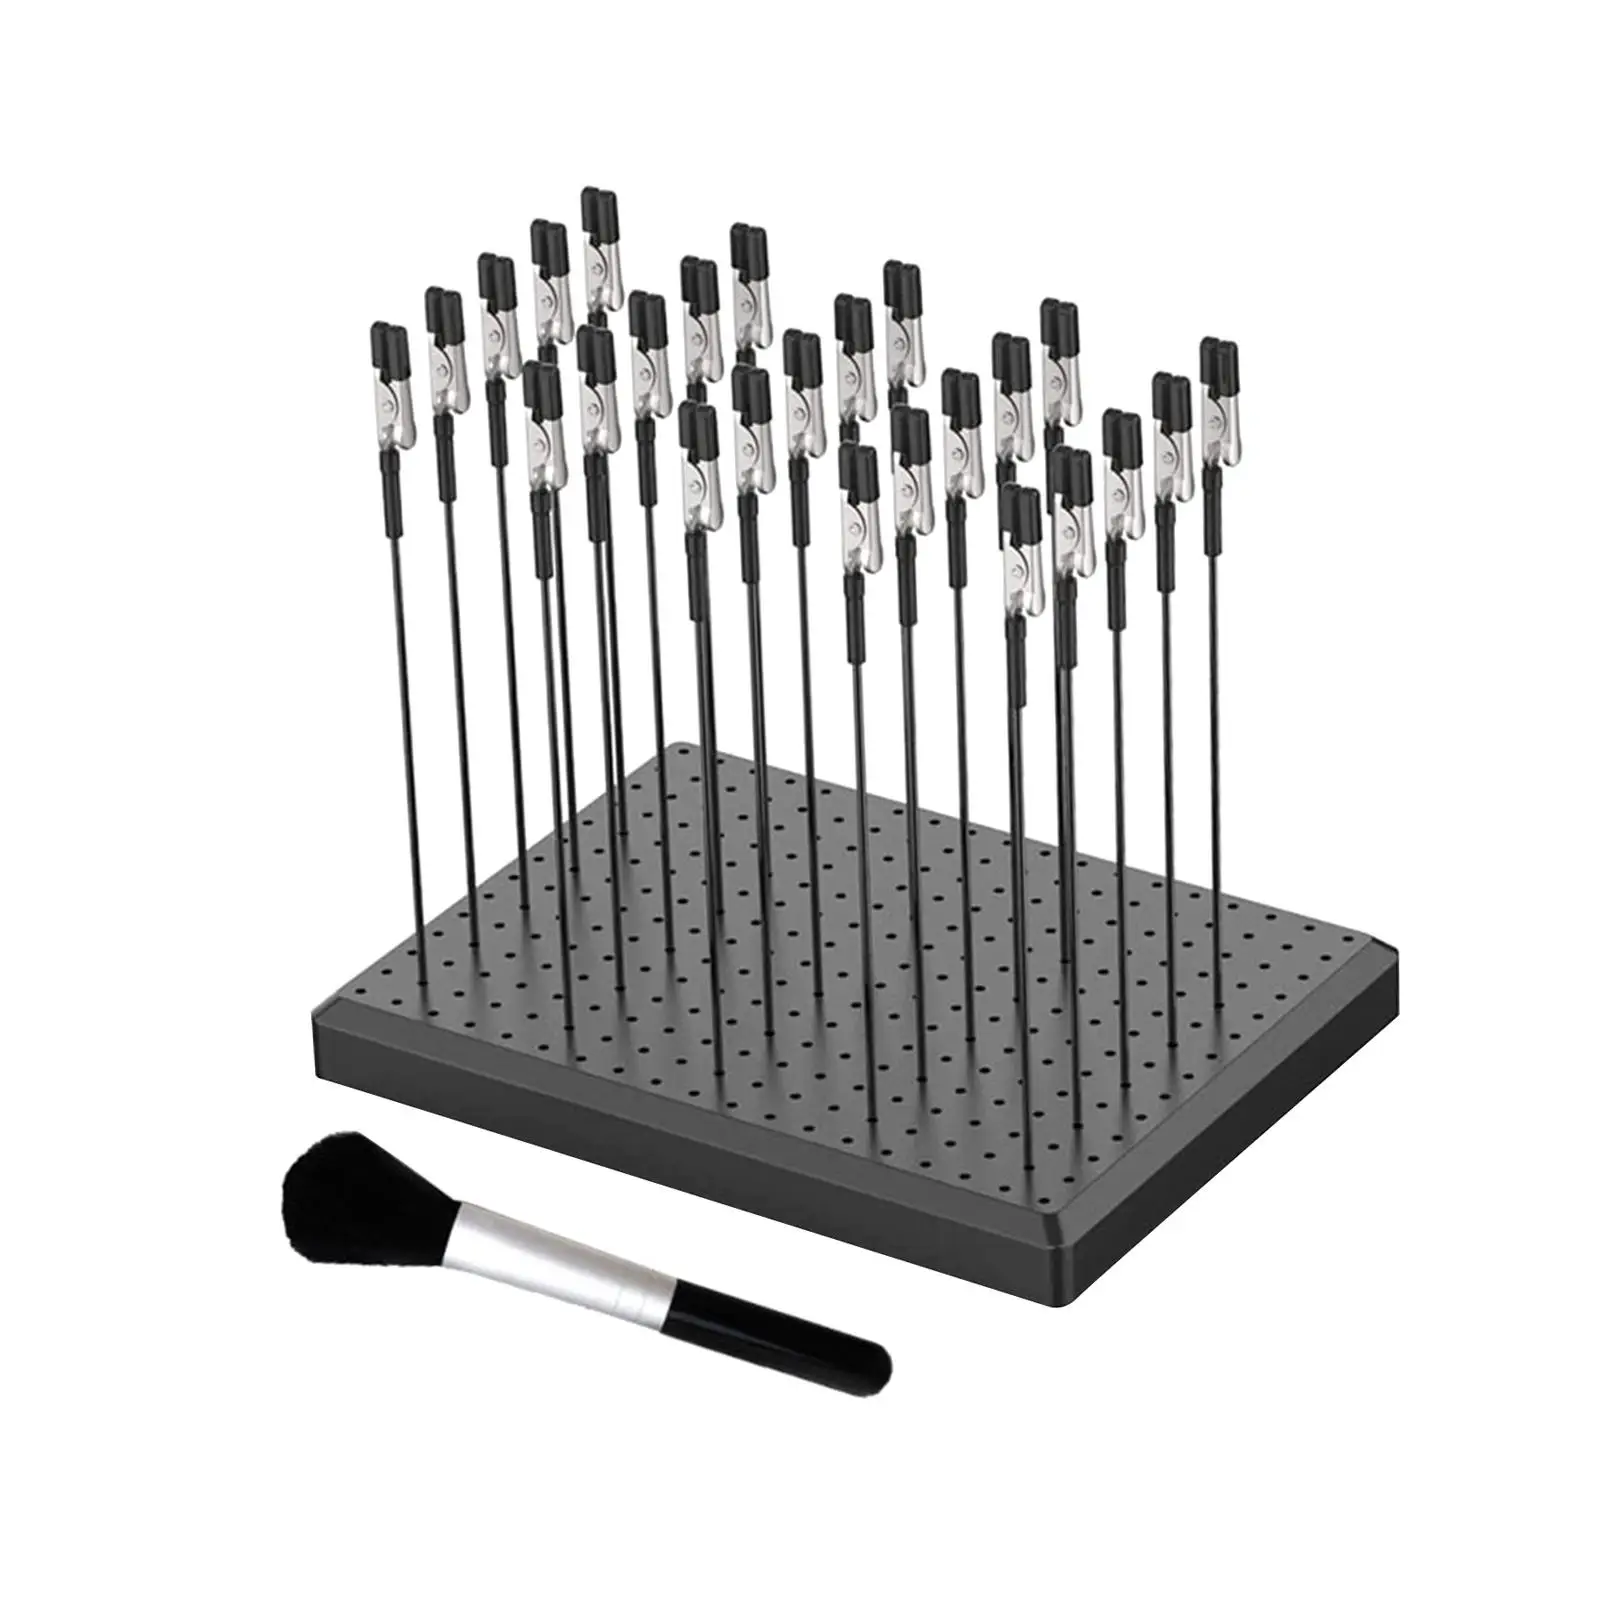 Painting Stand Base Holder and 10Pcs Alligator Clip Sticks Set Fit Exactly No Wobble Multipurpose Professional Modeling Tool